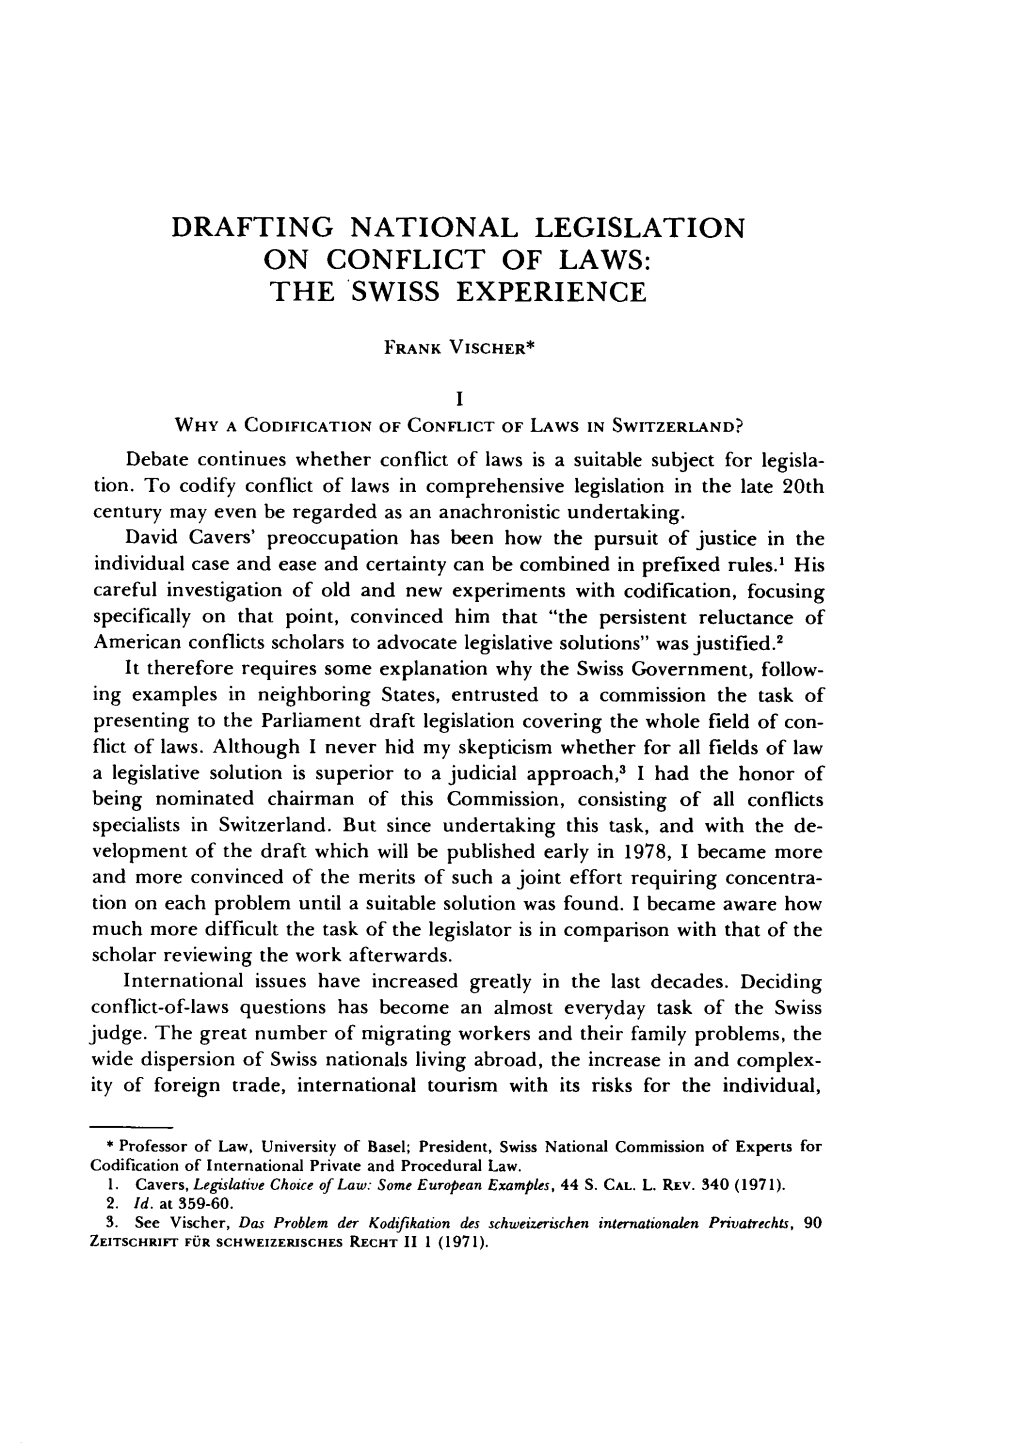 Drafting National Legislation on Conflict of Laws: the Swiss Experience